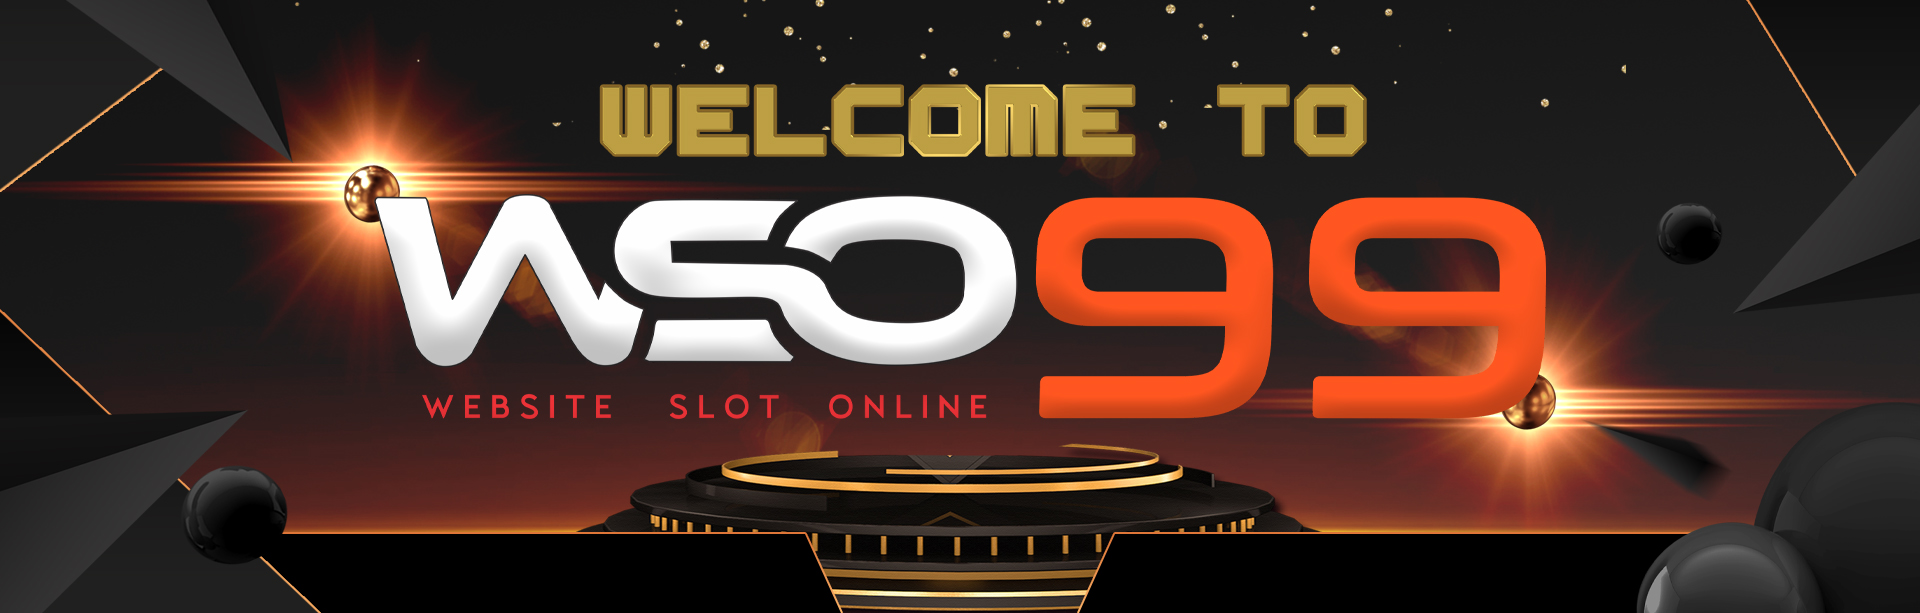 Welcome WSO99